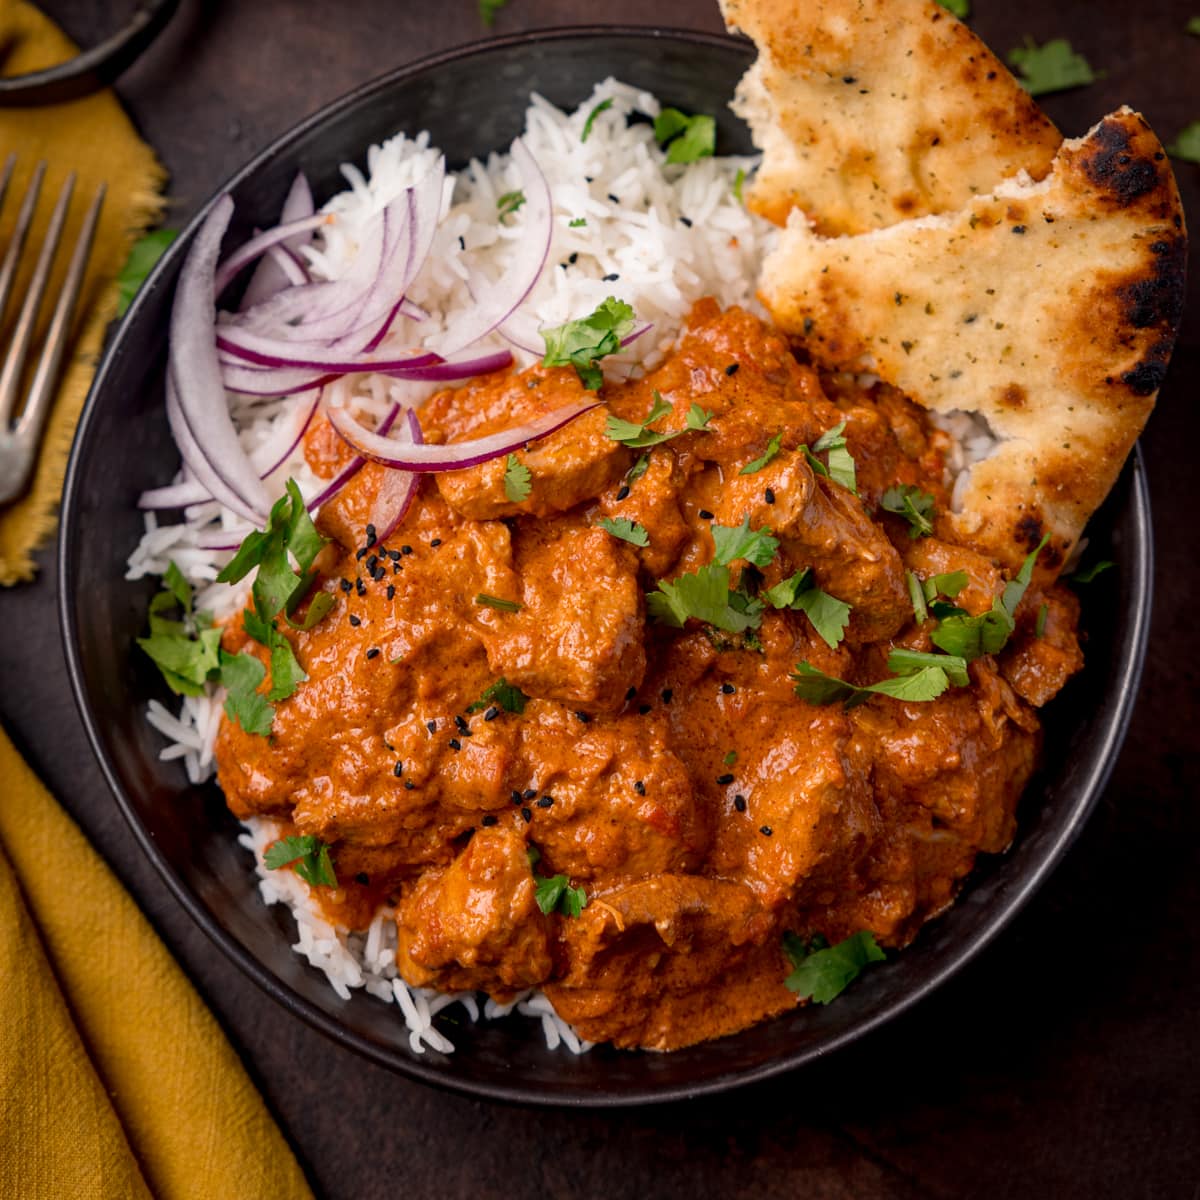 Overhead picture of a dark bowl full of boiled rice and crock pot butter chicken with some sliced red onion and charred naan bread in the corner of the bowl.